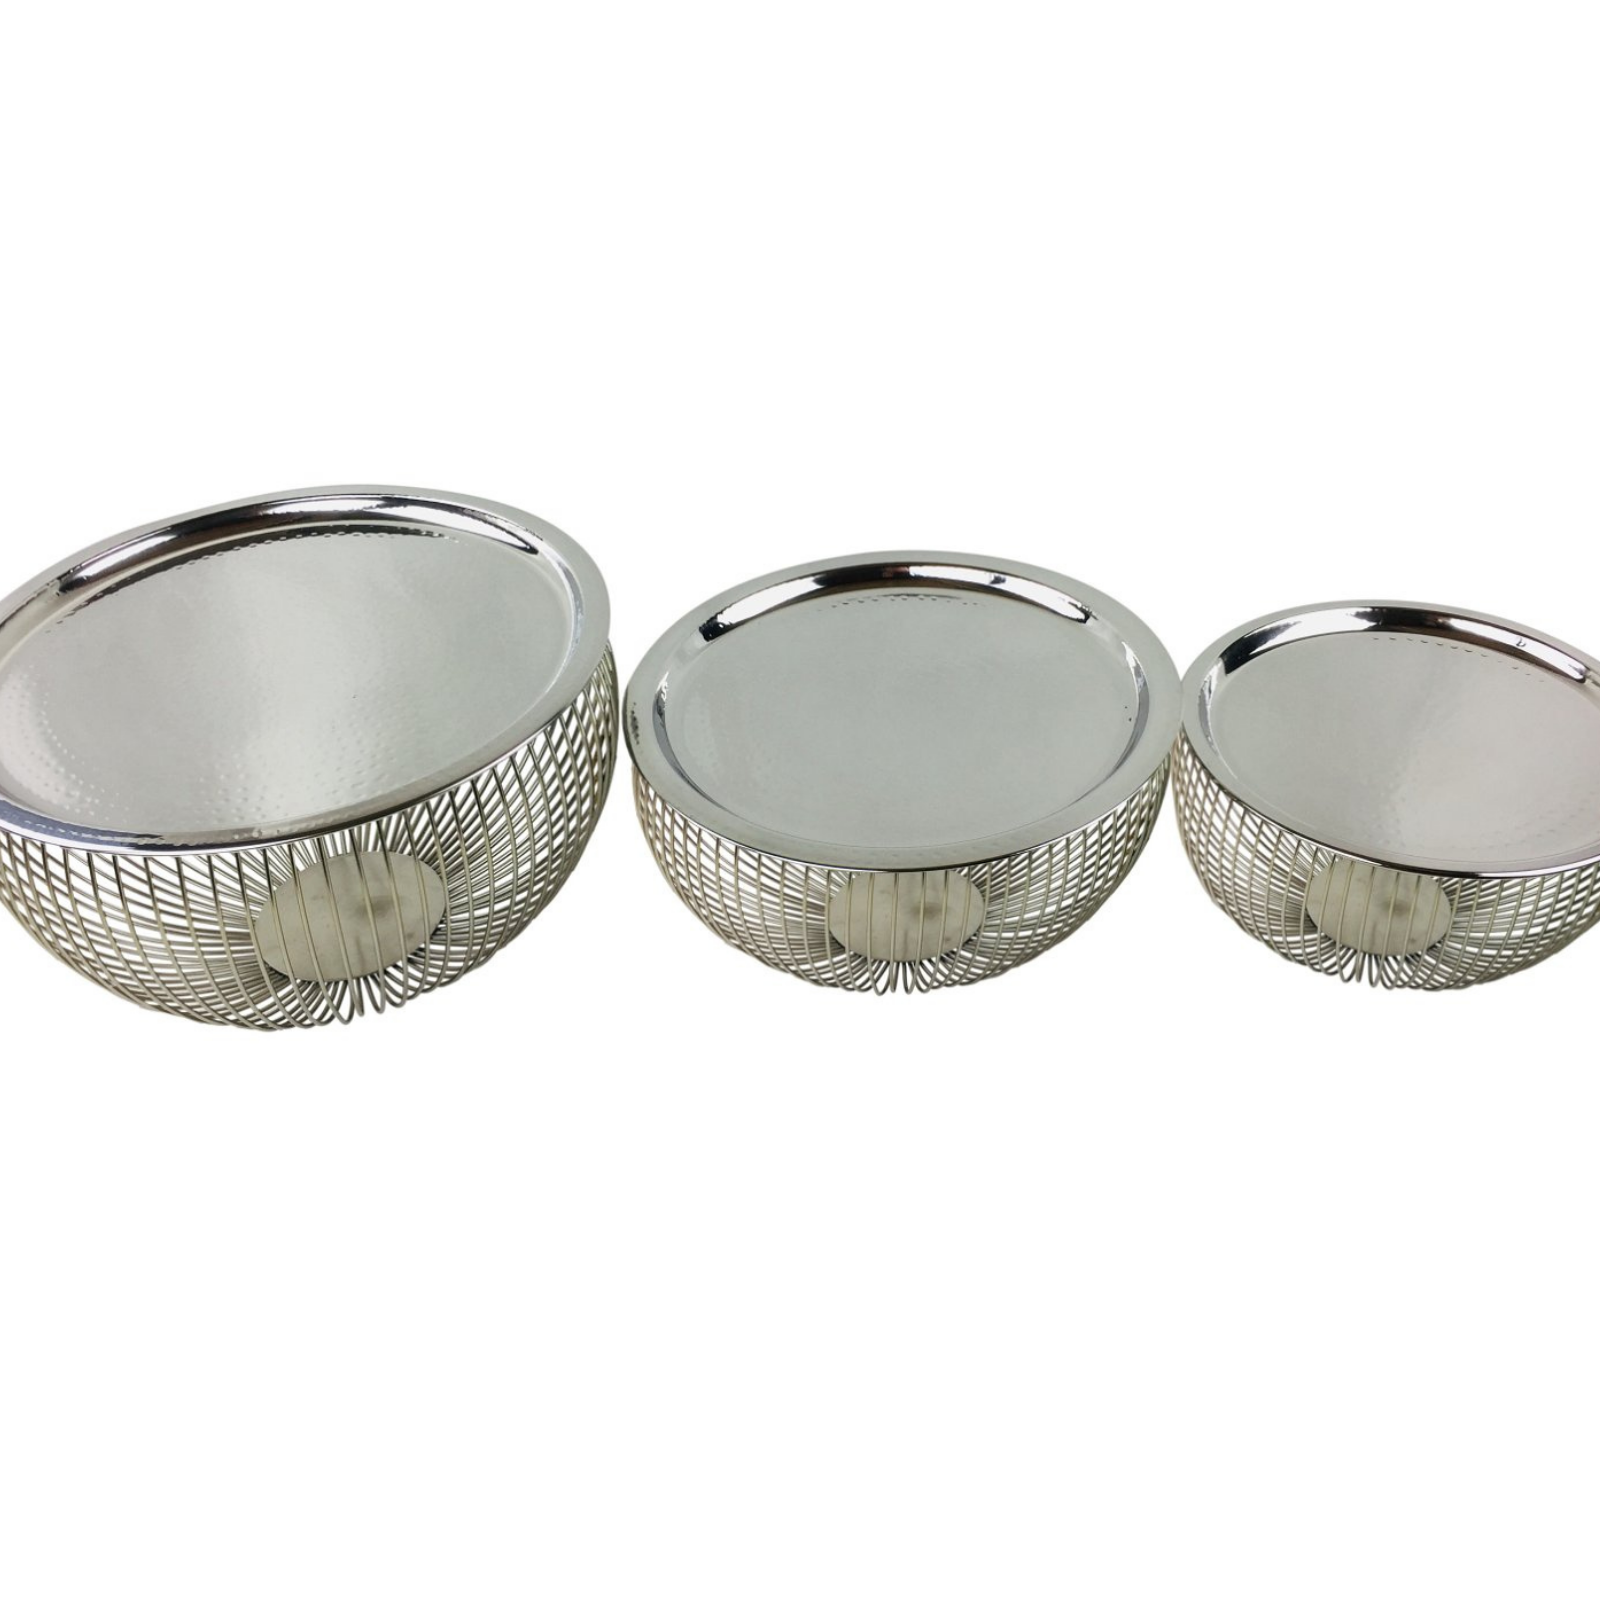 Set Of 3 Silver Bowls With Plate Tops